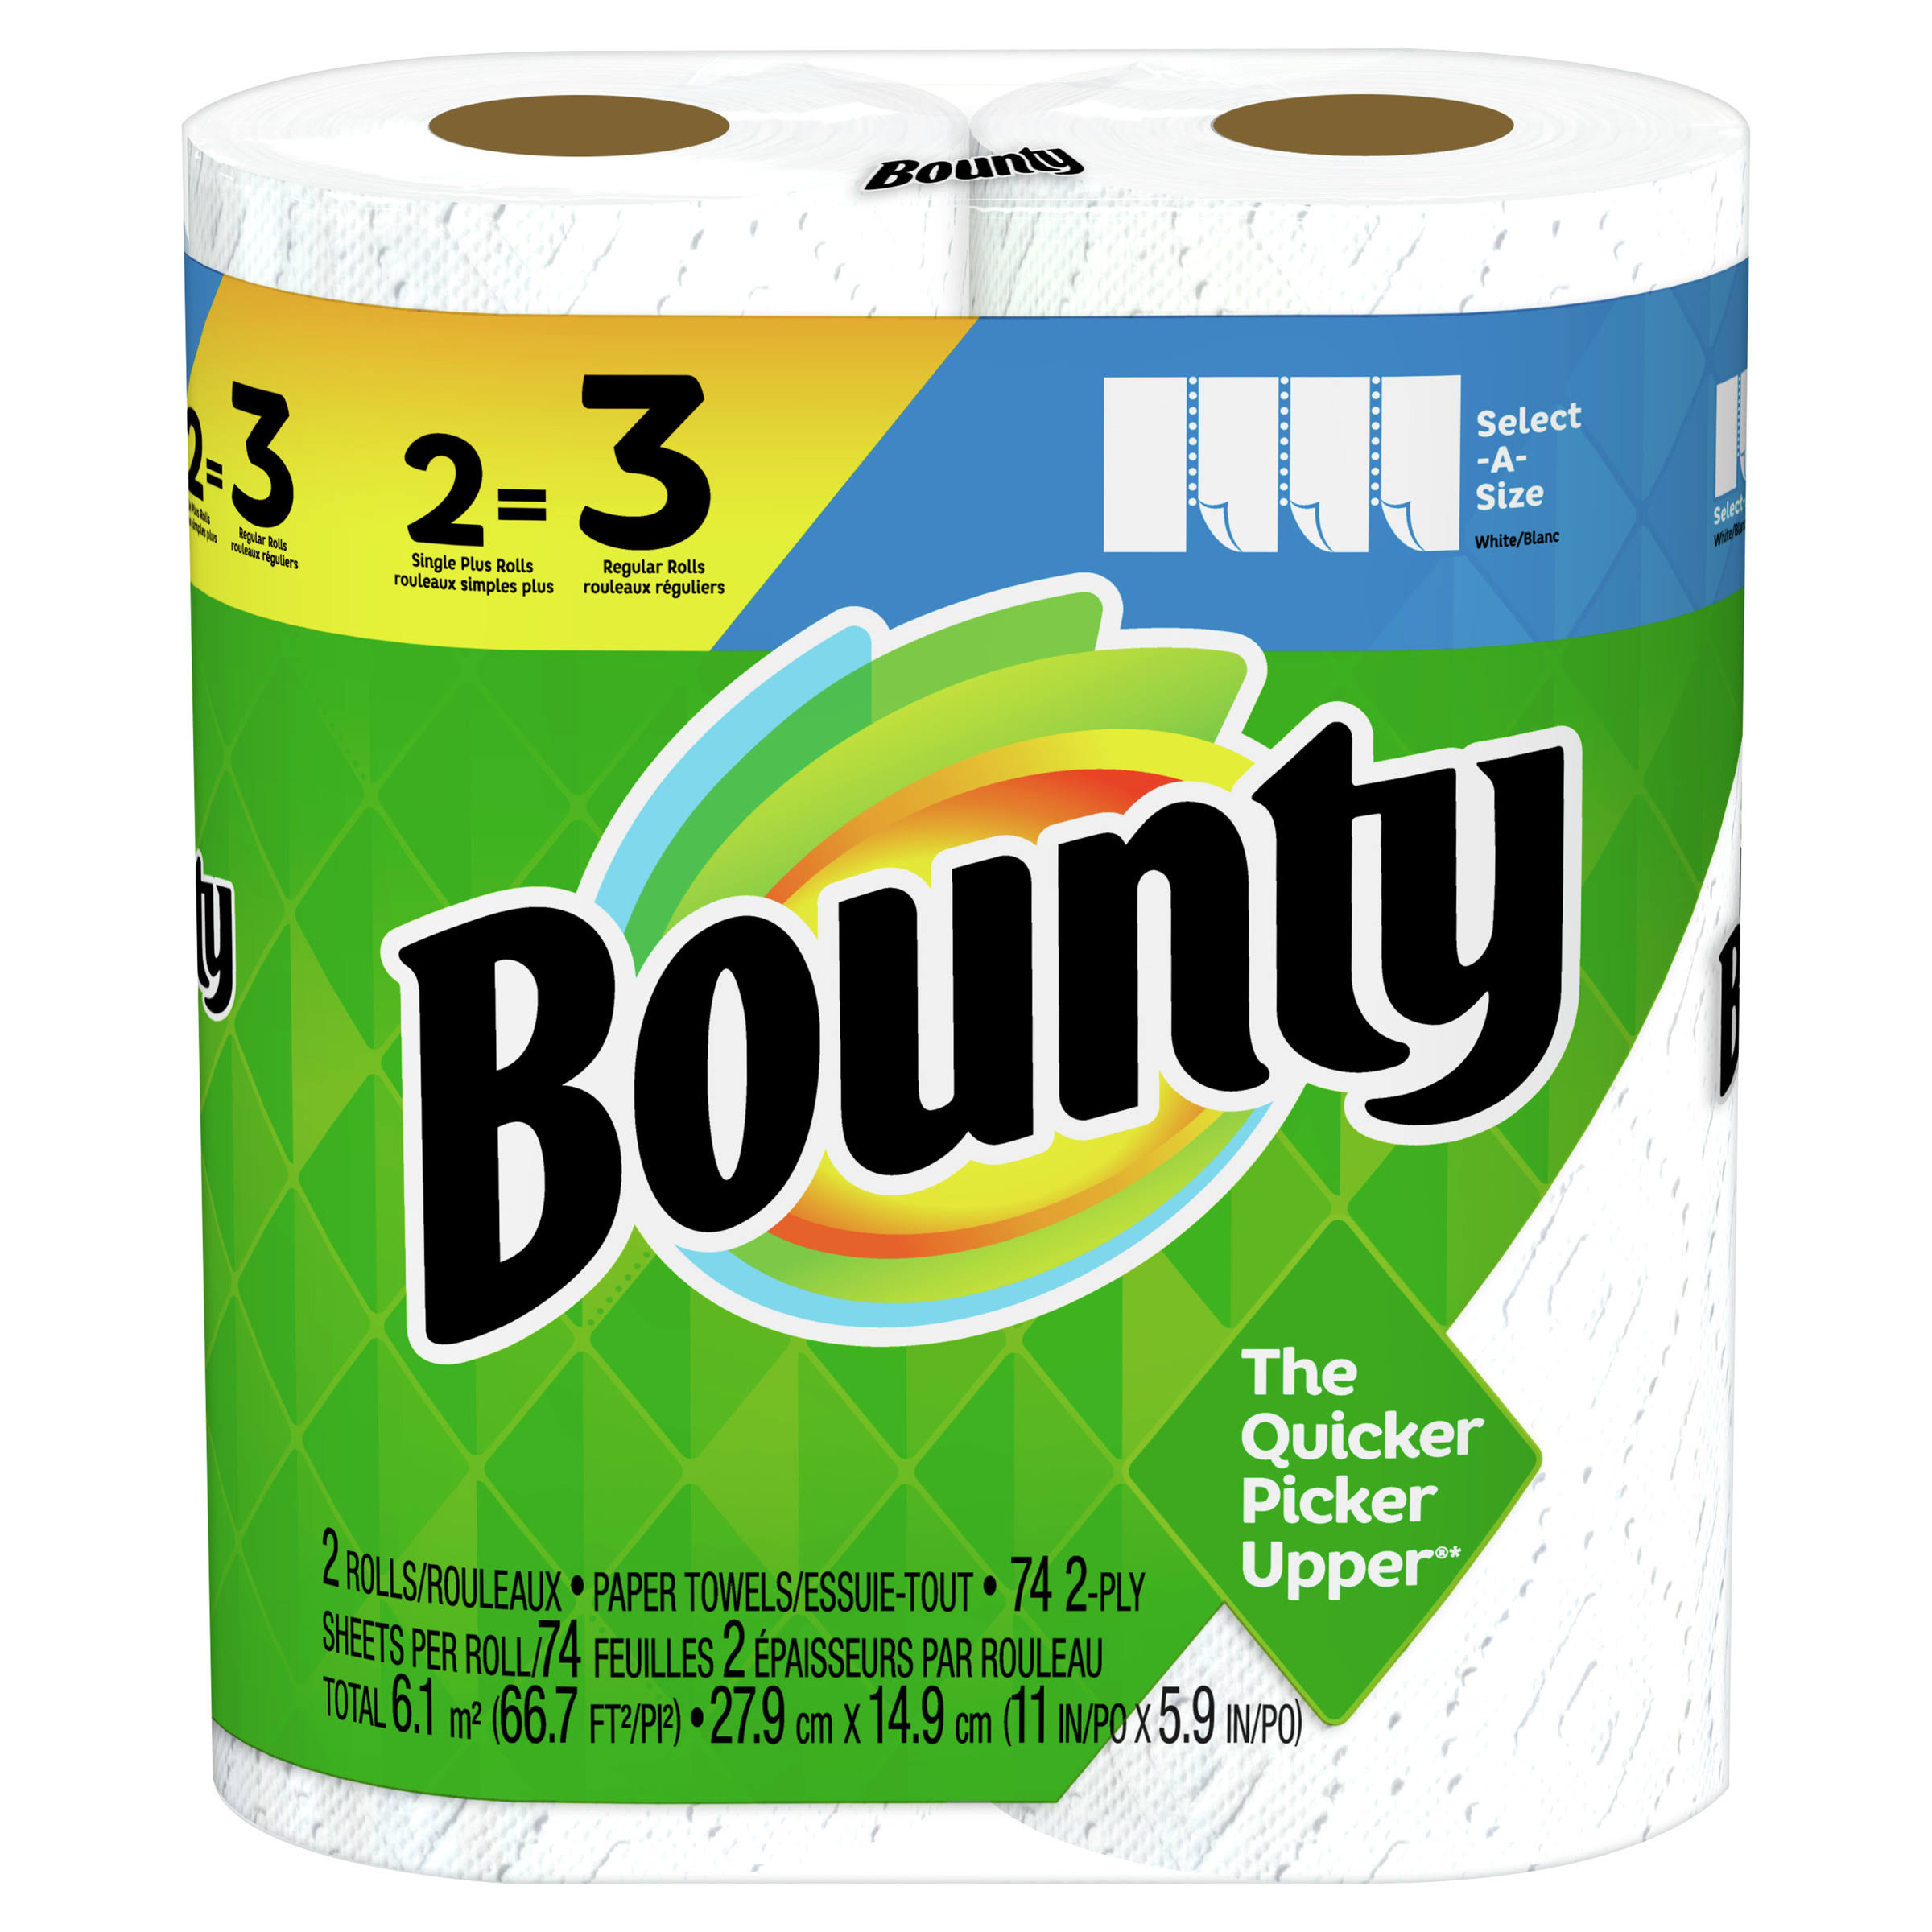 Bounty Paper Towels, Select-A-Size, White, Single Plus Rolls, 2-Ply - 2 rolls